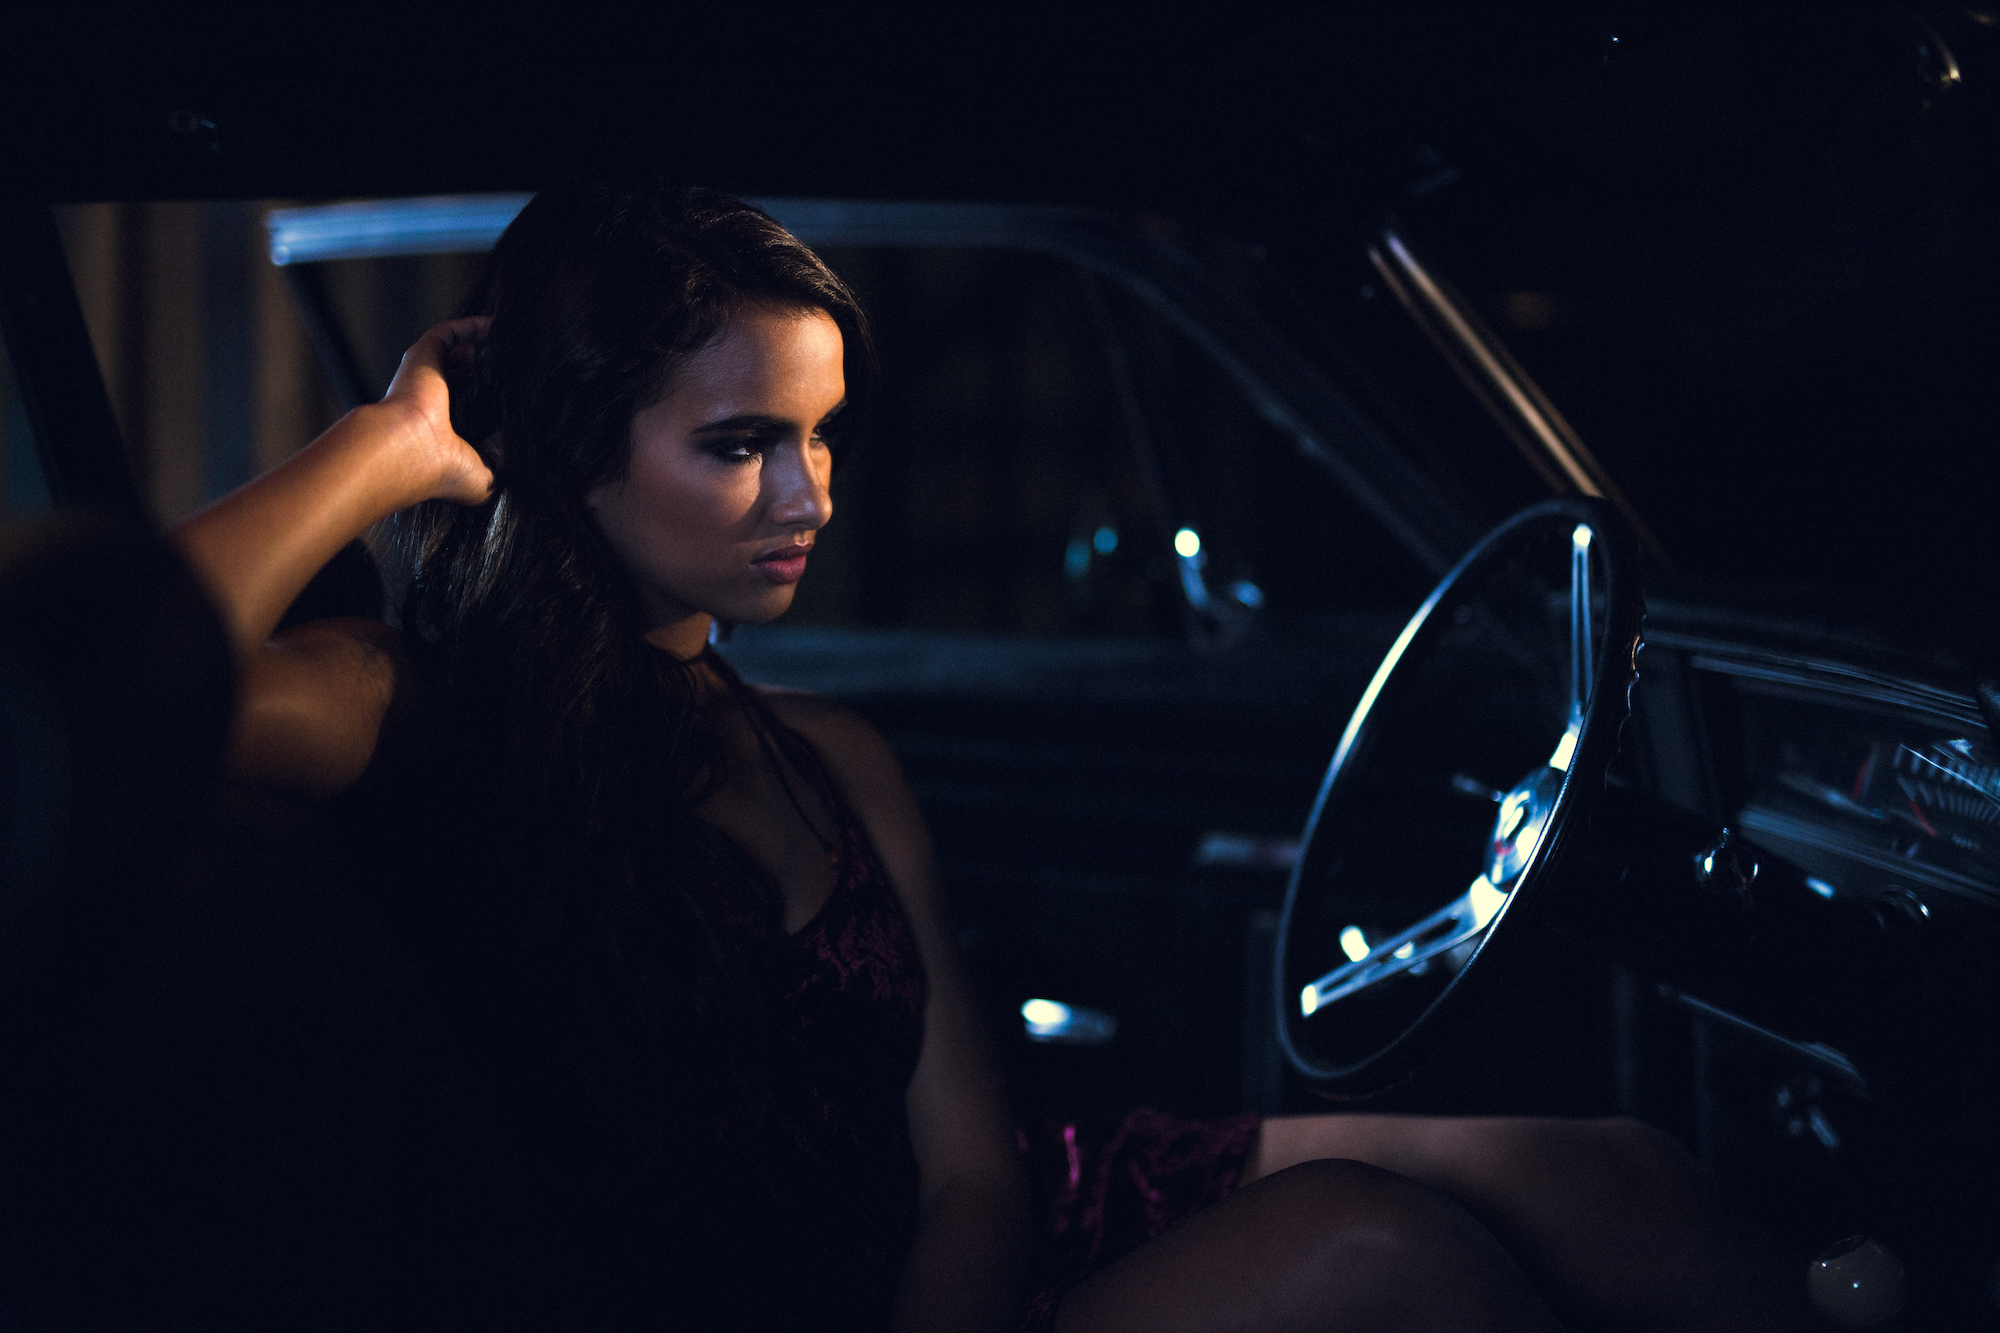 Creative Talent Agency Fort Lauderdale Model Profile Mercedes Side profile of woman with long hair wearing lingerie posing for camera from the front seat of an old car looking out the windshield